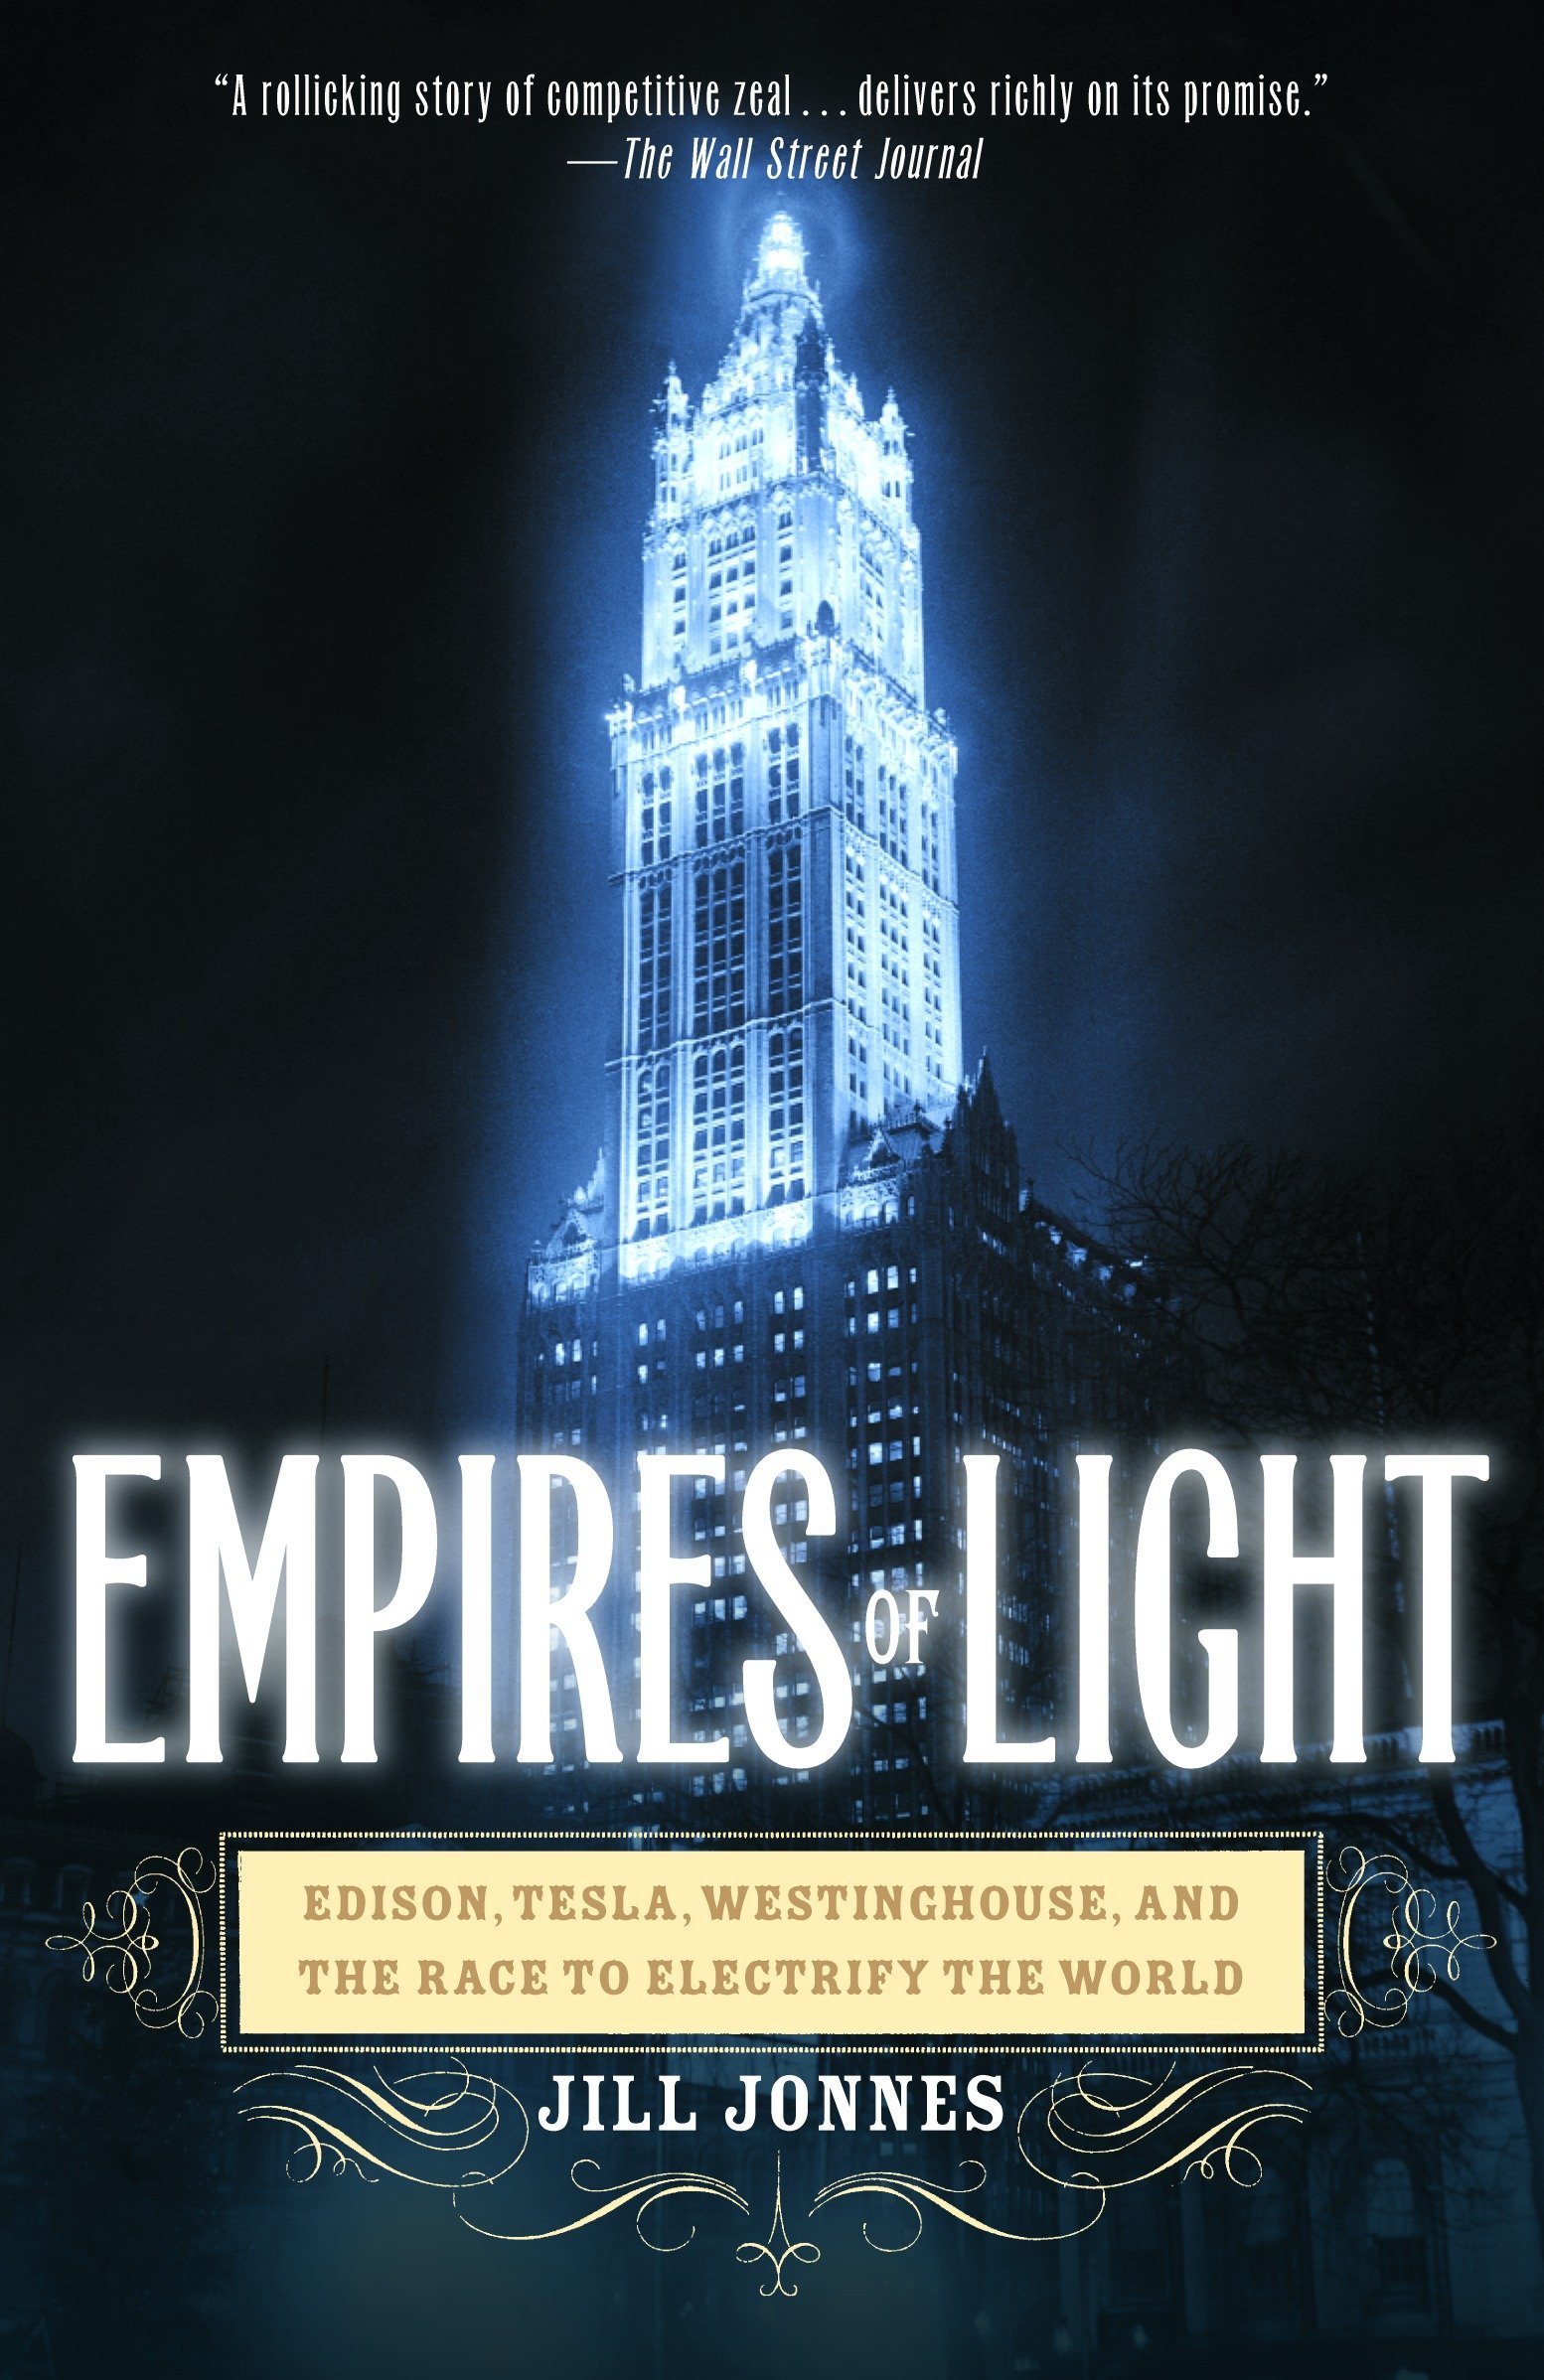 A book cover for Empires of Light - Edison, Tesla, Westinghouse, and the Race to Electrify the World by Jill Jonnes apart of the virtual book club.